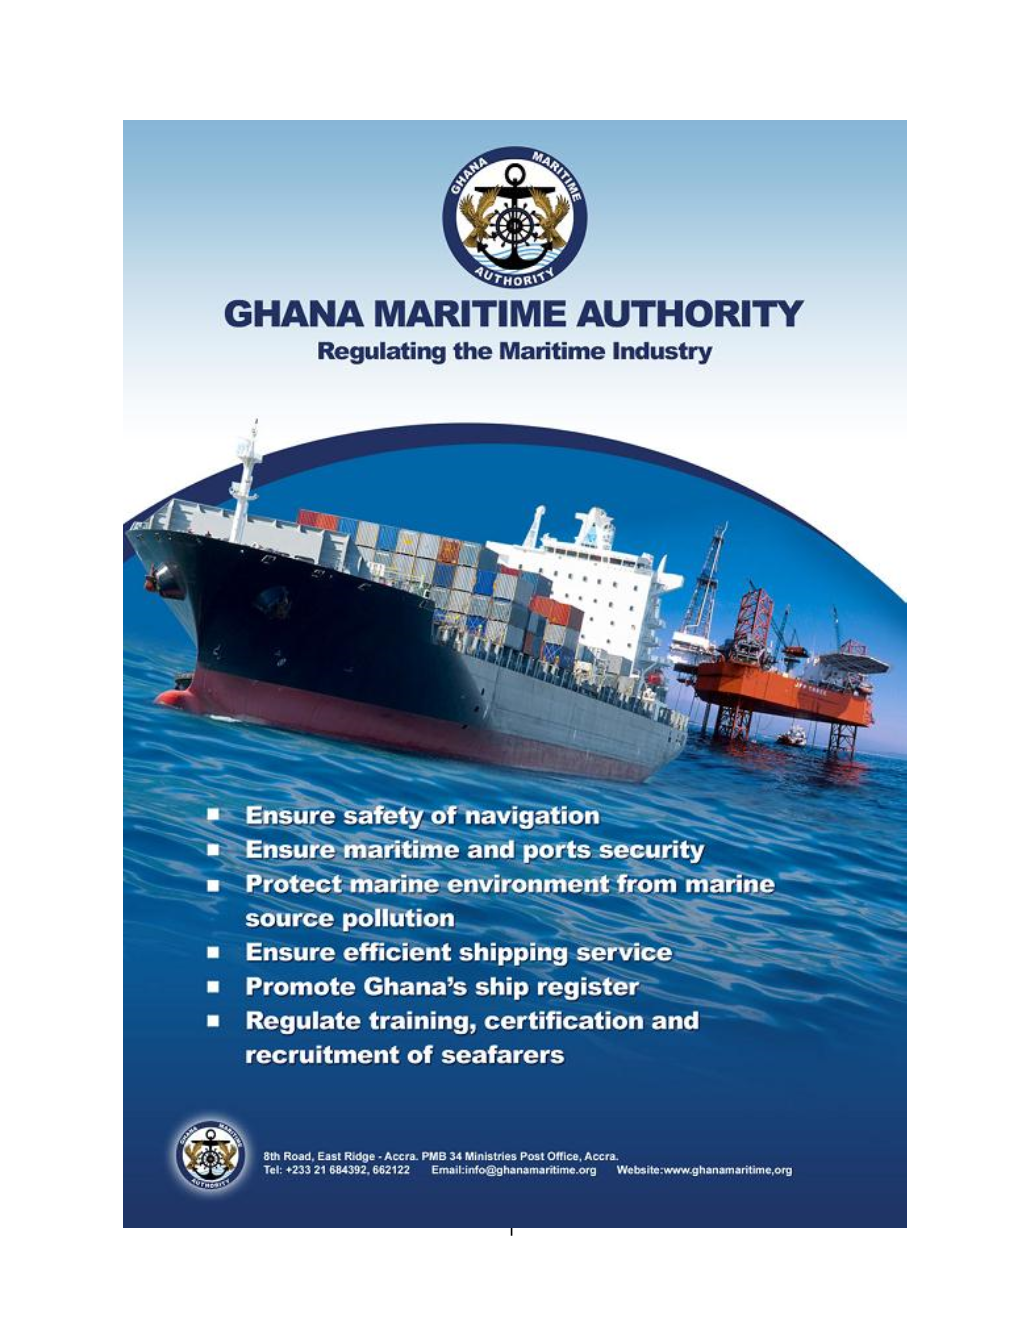 Annual Report of the Ghana Maritime Authority